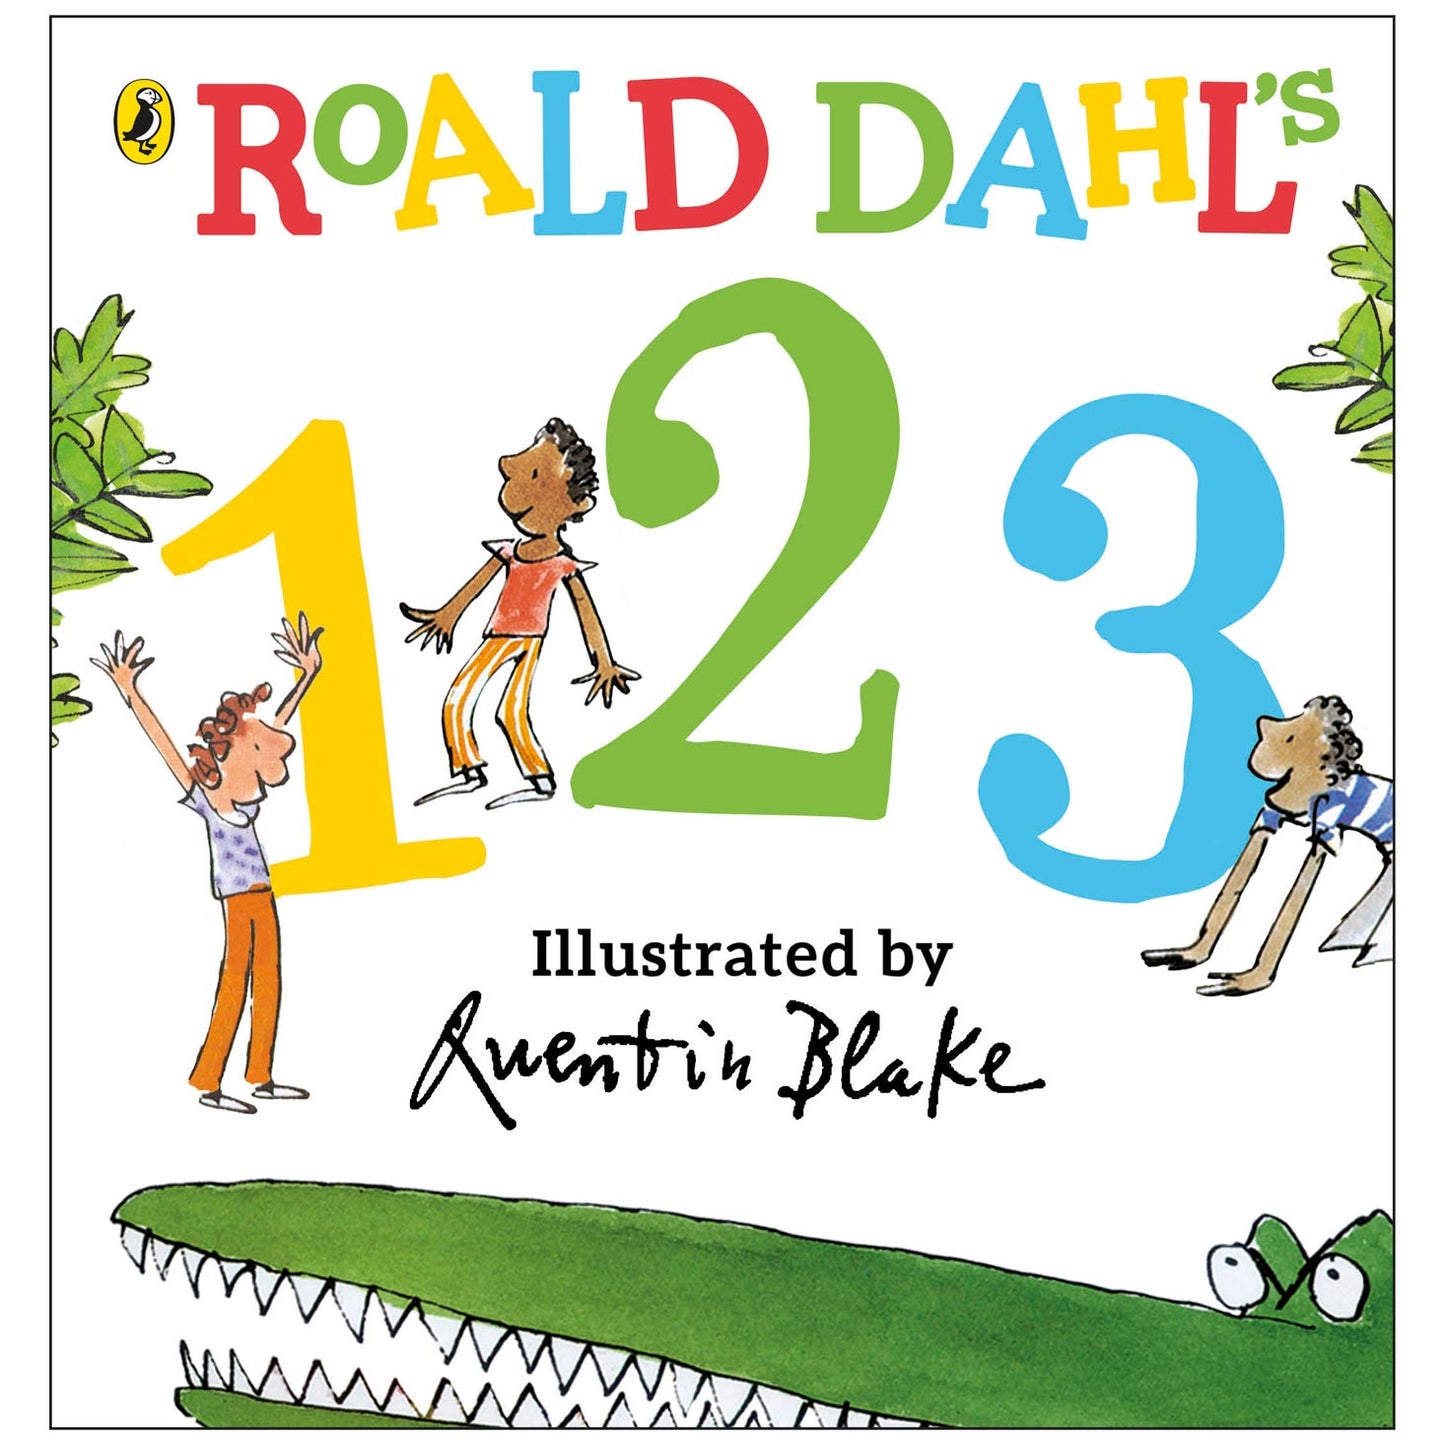 Roald Dahl's 123, a board book for toddlers